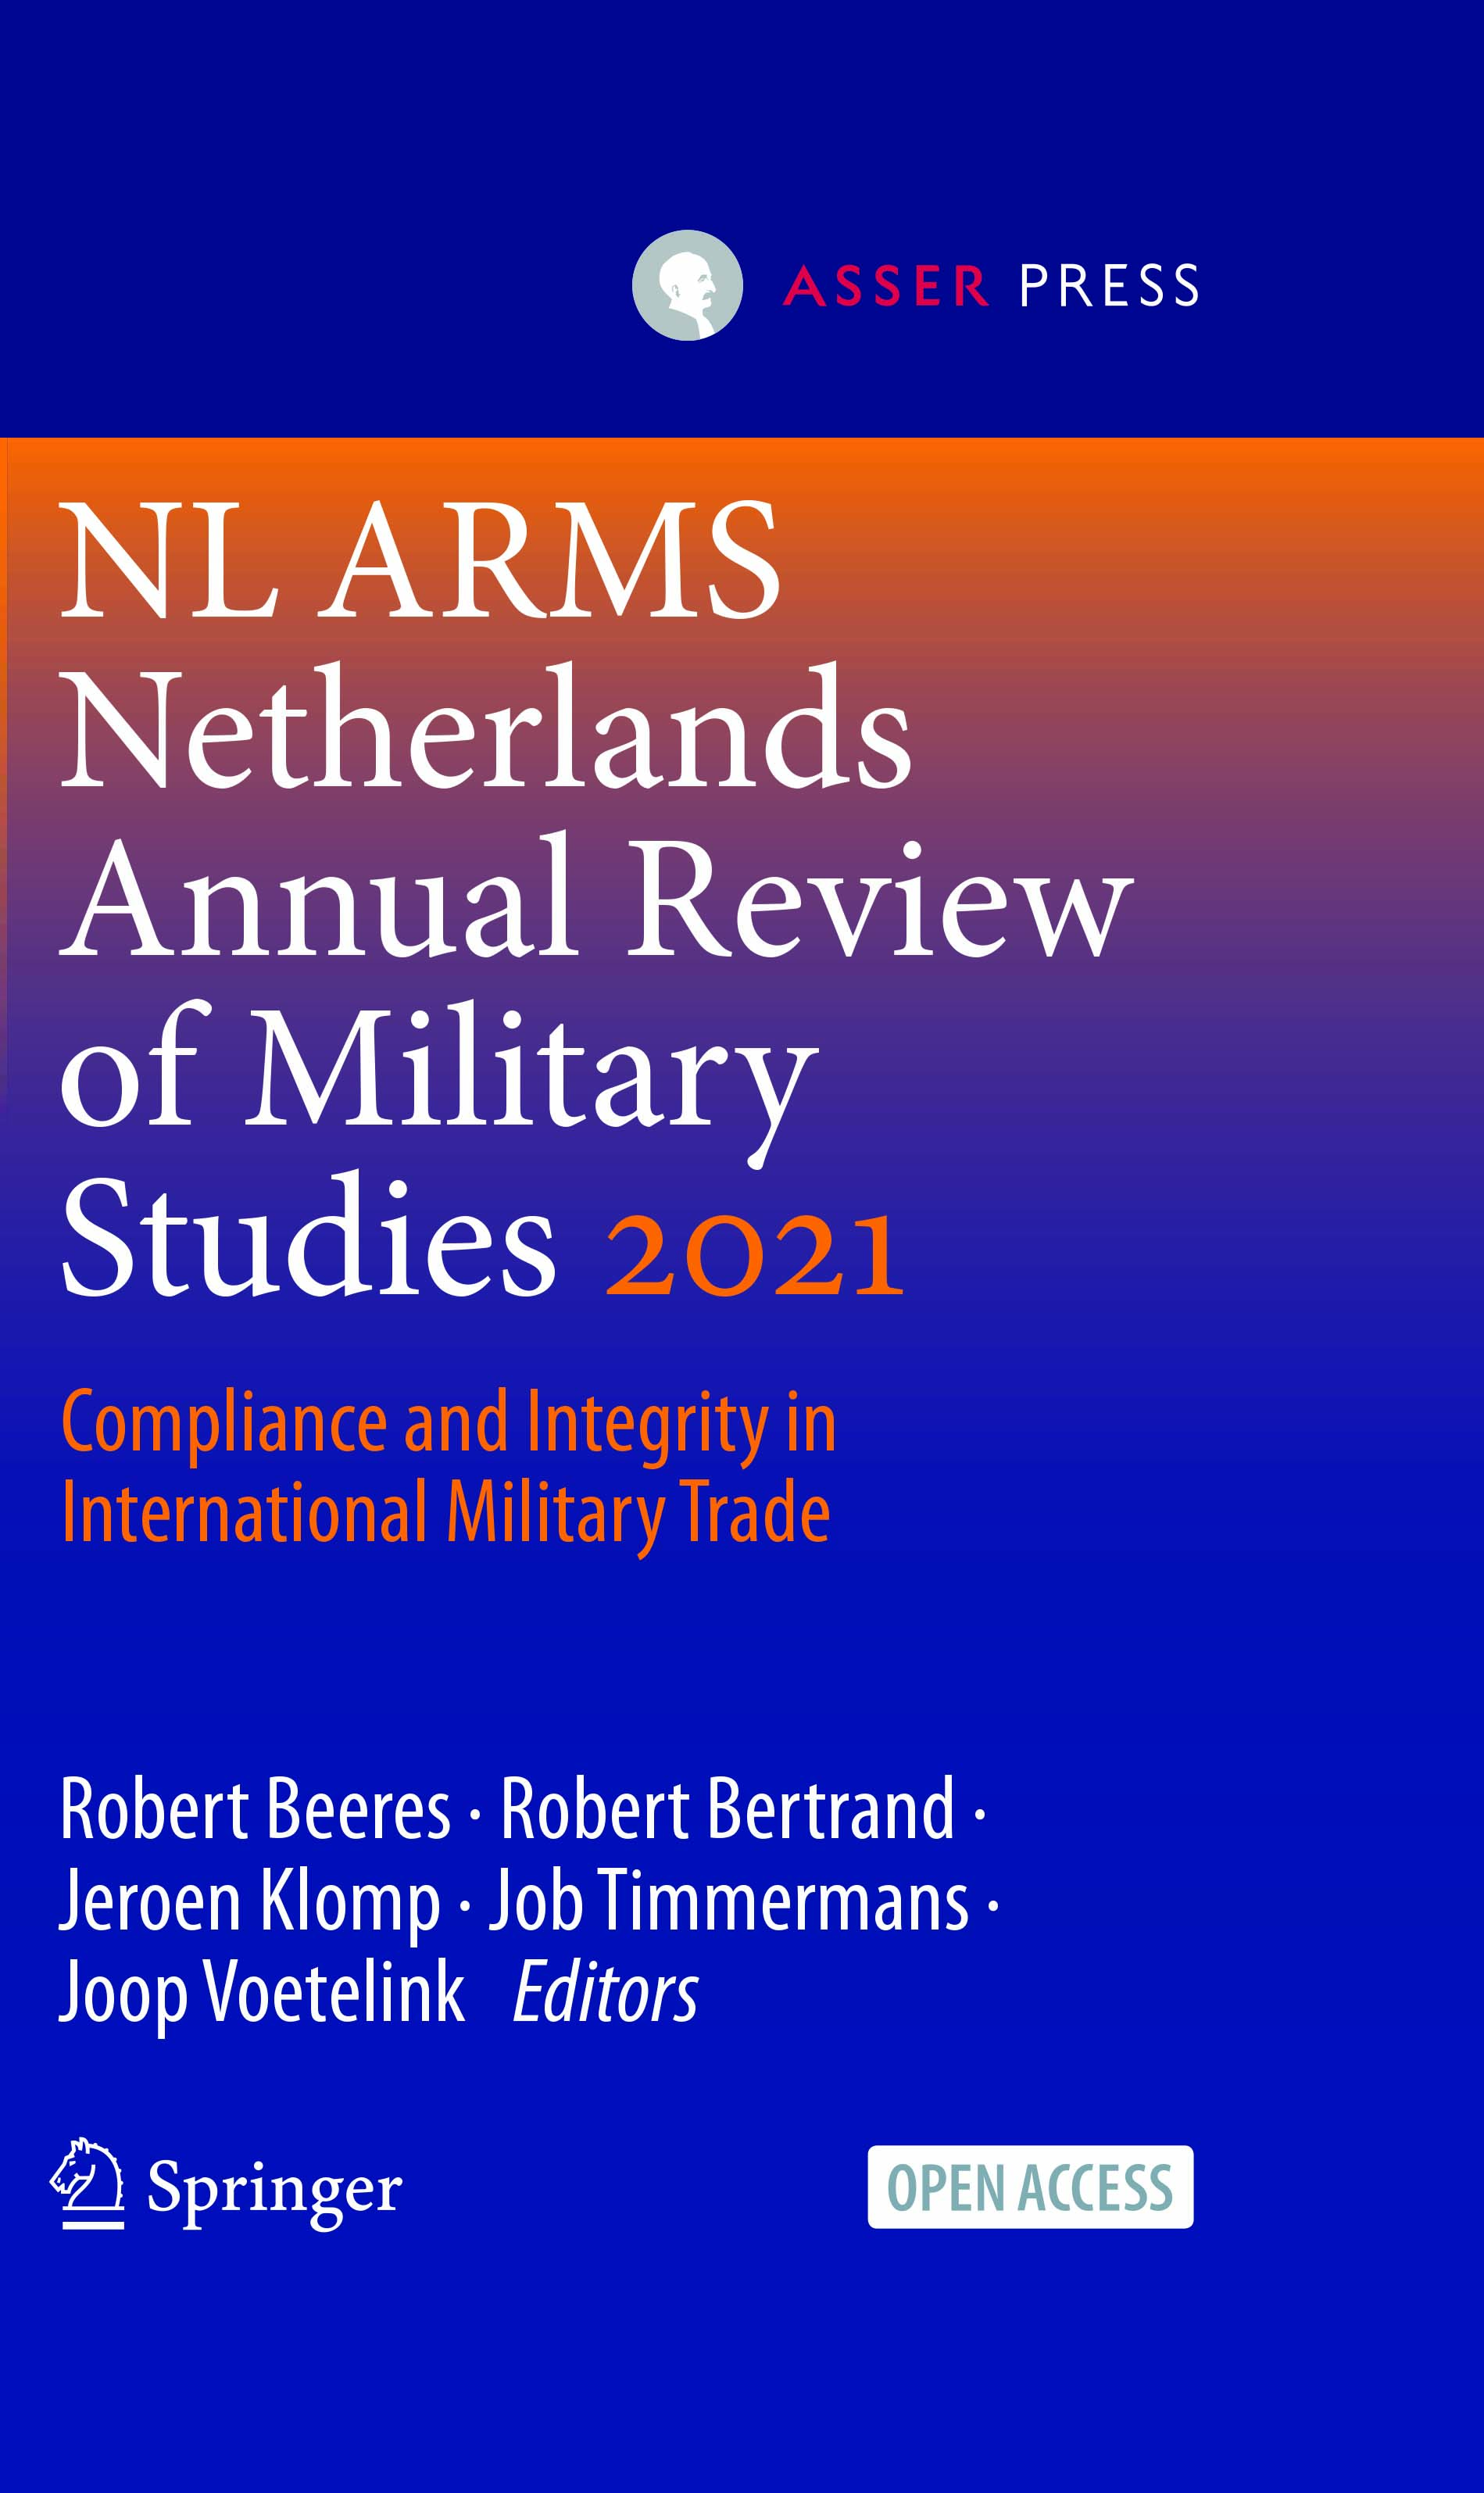 NL ARMS 2021 - Compliance and Integrity in International Military Trade